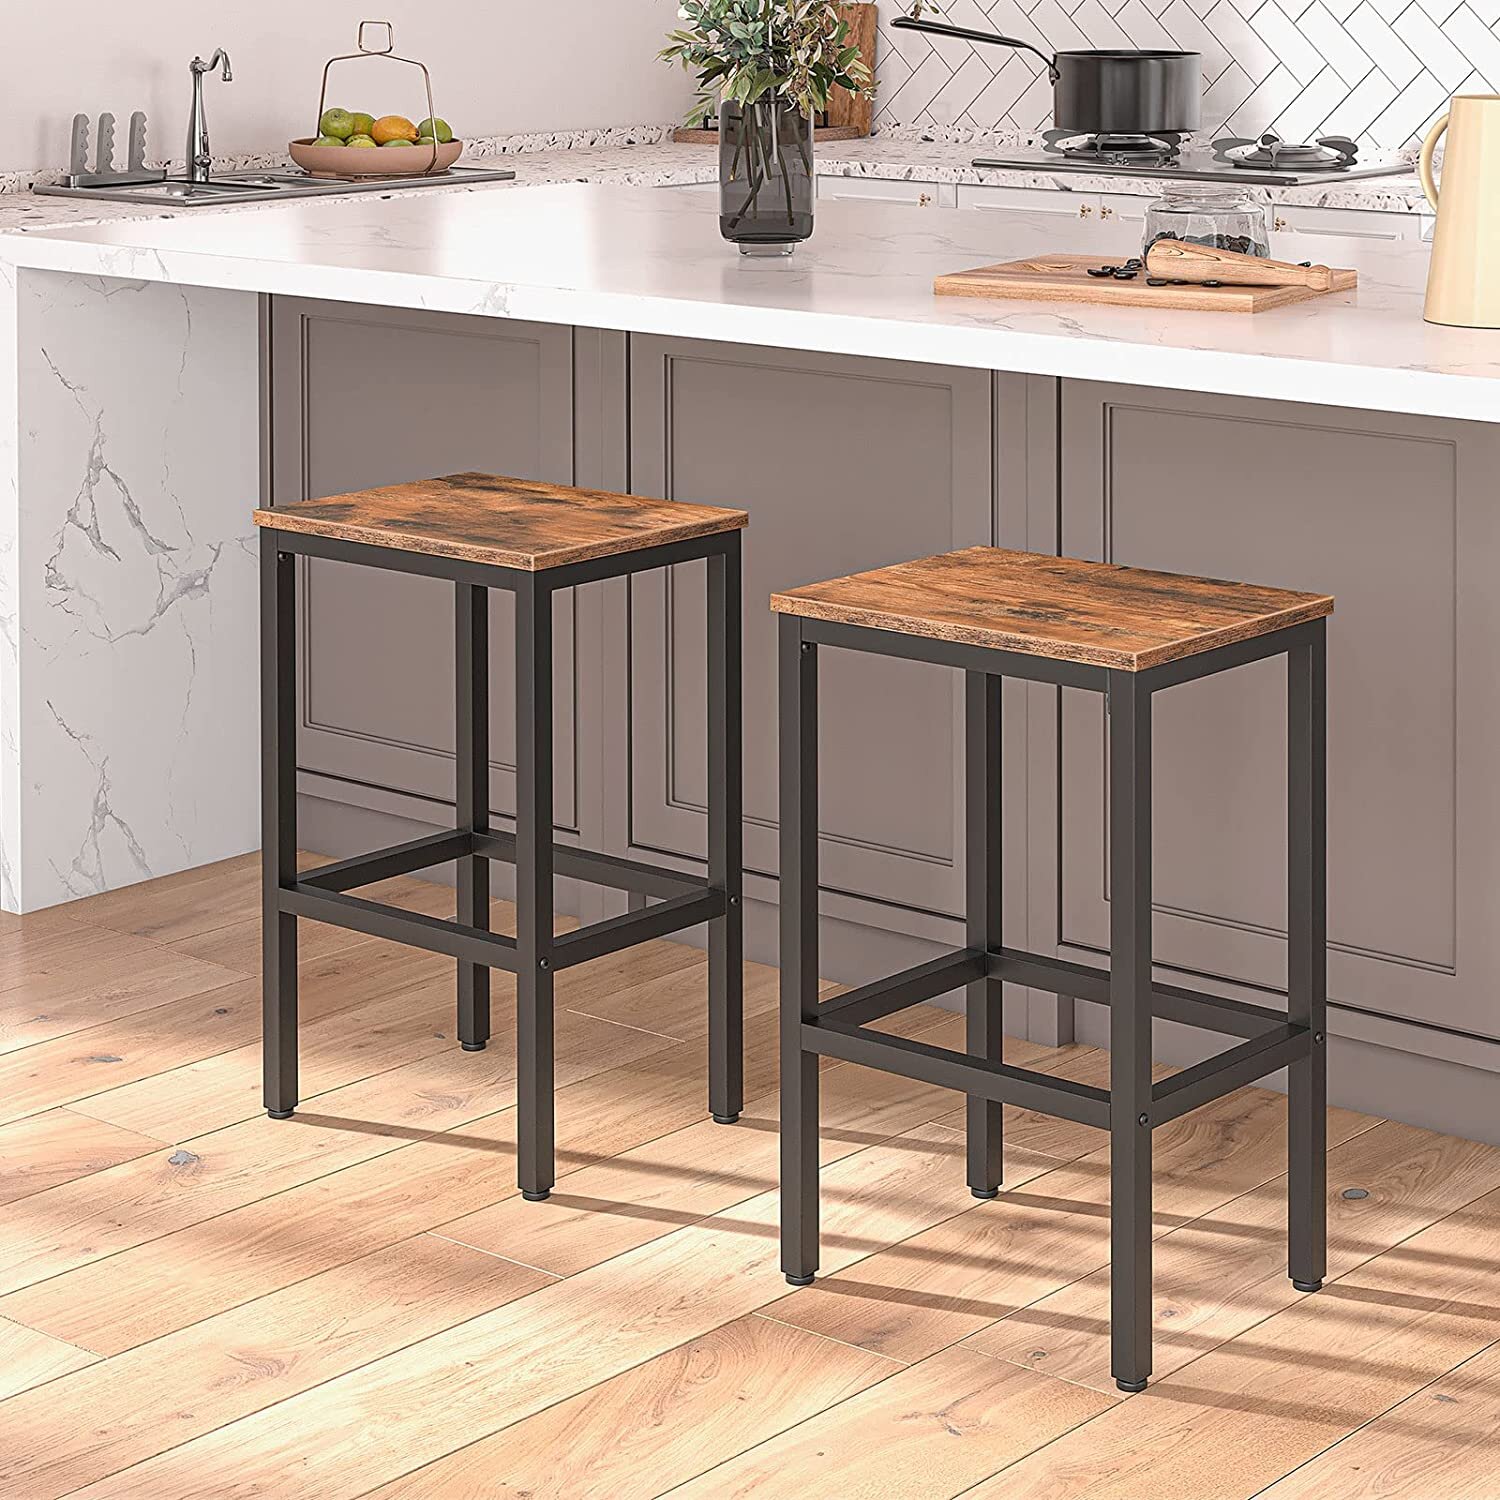 Industrial Kitchen Counter with Bar Chairs 2 Seater Bar Table Set Breakfast Bar Table and Stool Set,for Living Room/Party Room/Bar/Kitchen Oak 